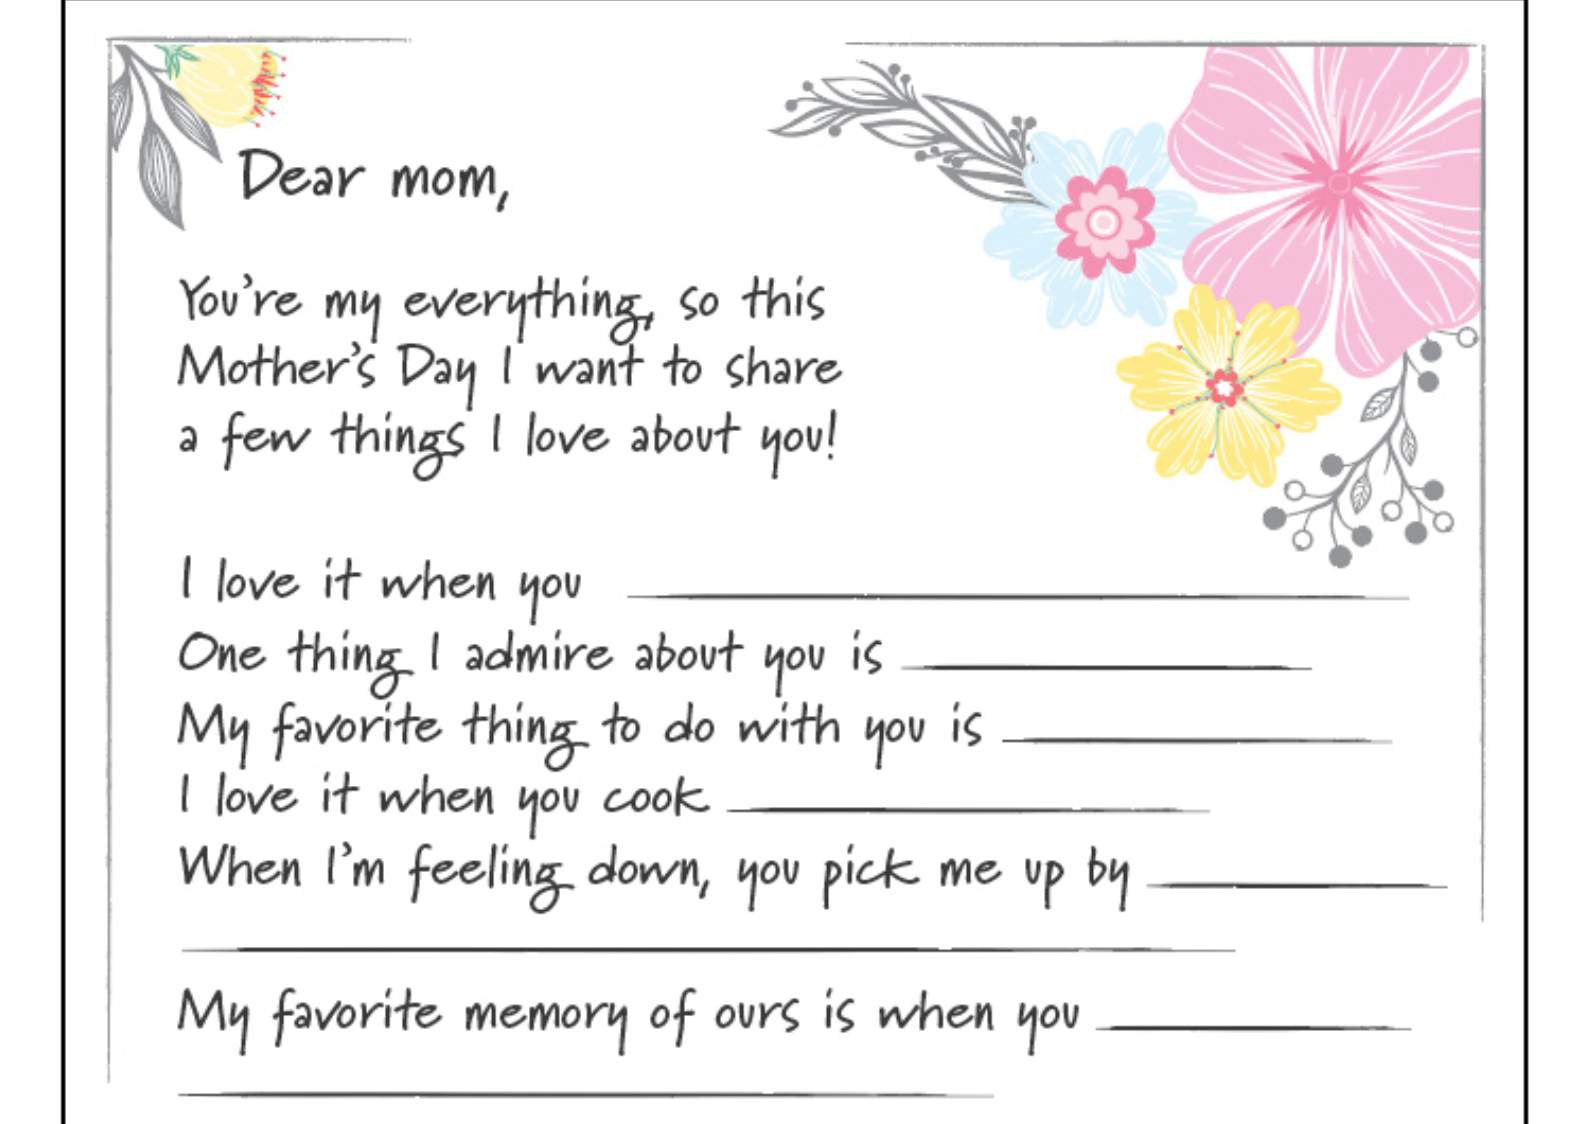 You can thank your mom with this DIY Mother’s Day card